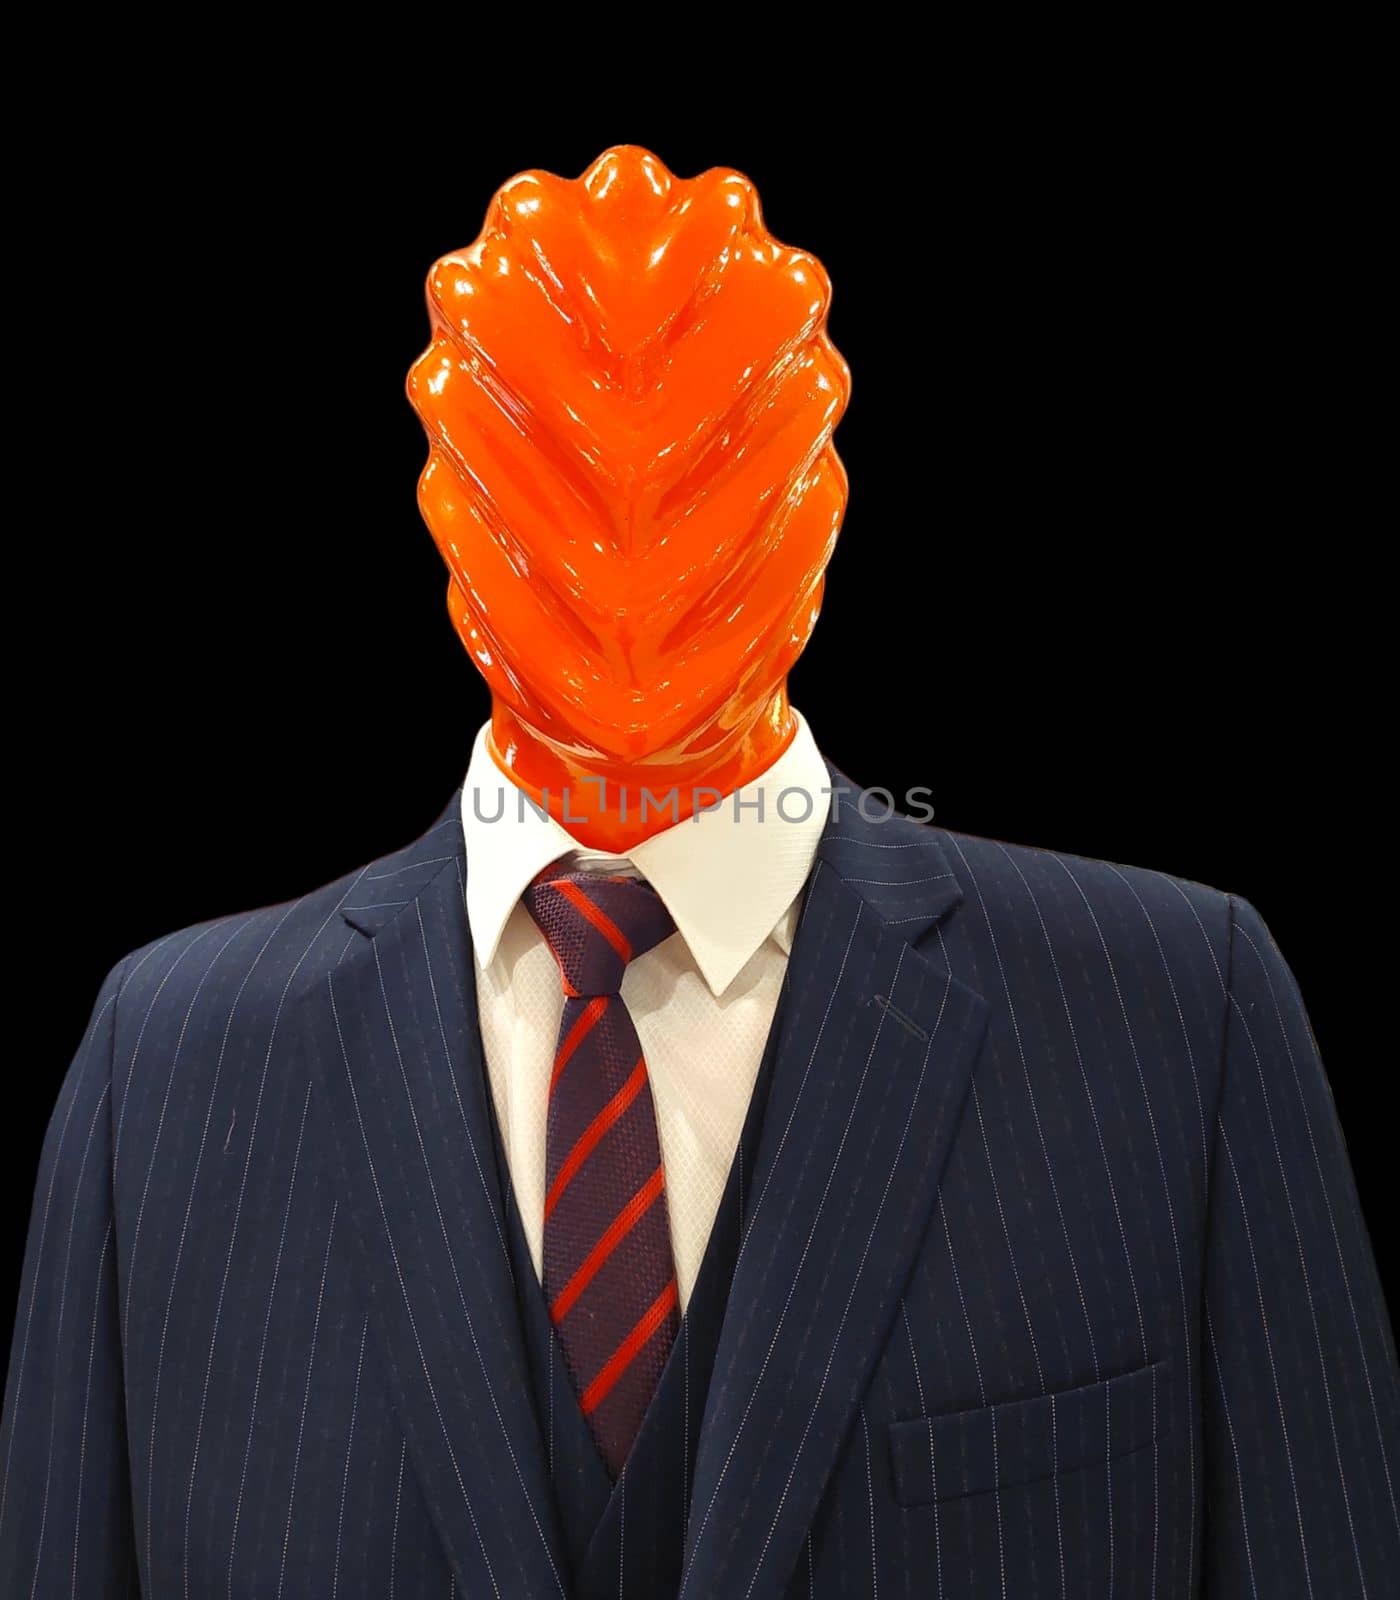 Fashion mannequin wearing a suit with a red abstract head. Isolated background.